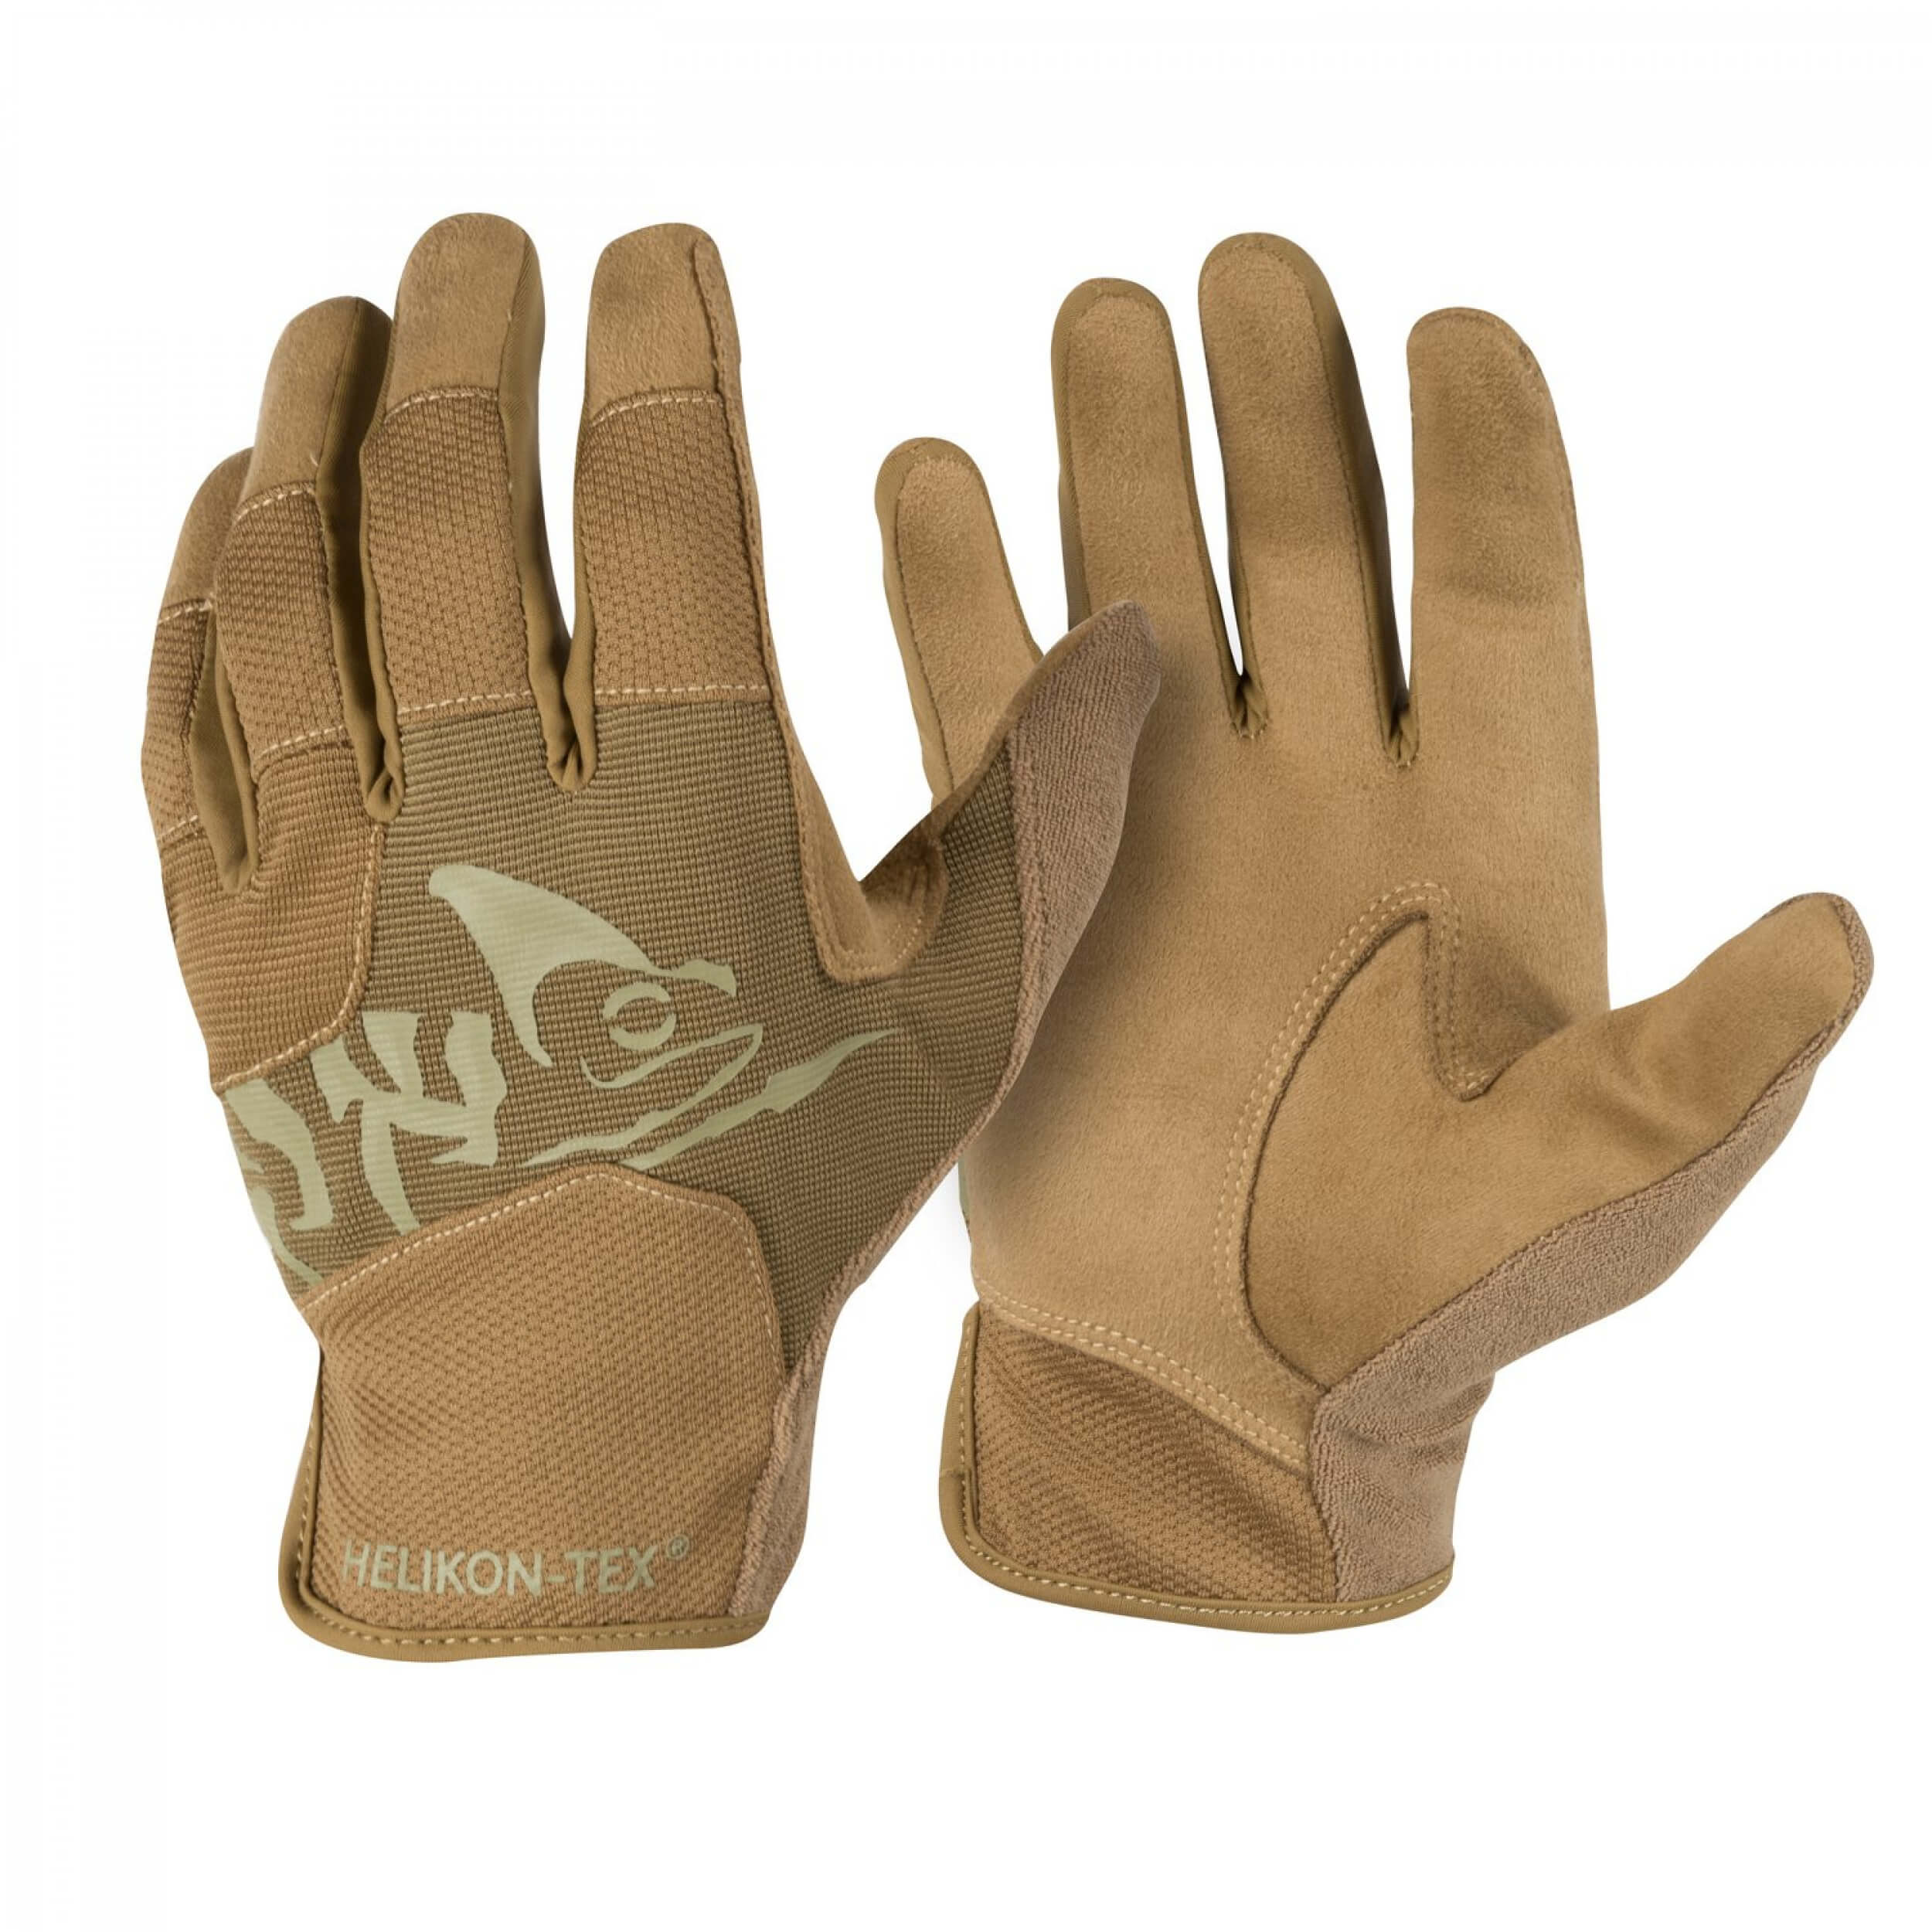 Helikon-Tex All Round Fit Tactical Gloves Light - Coyote / Adaptive Green A